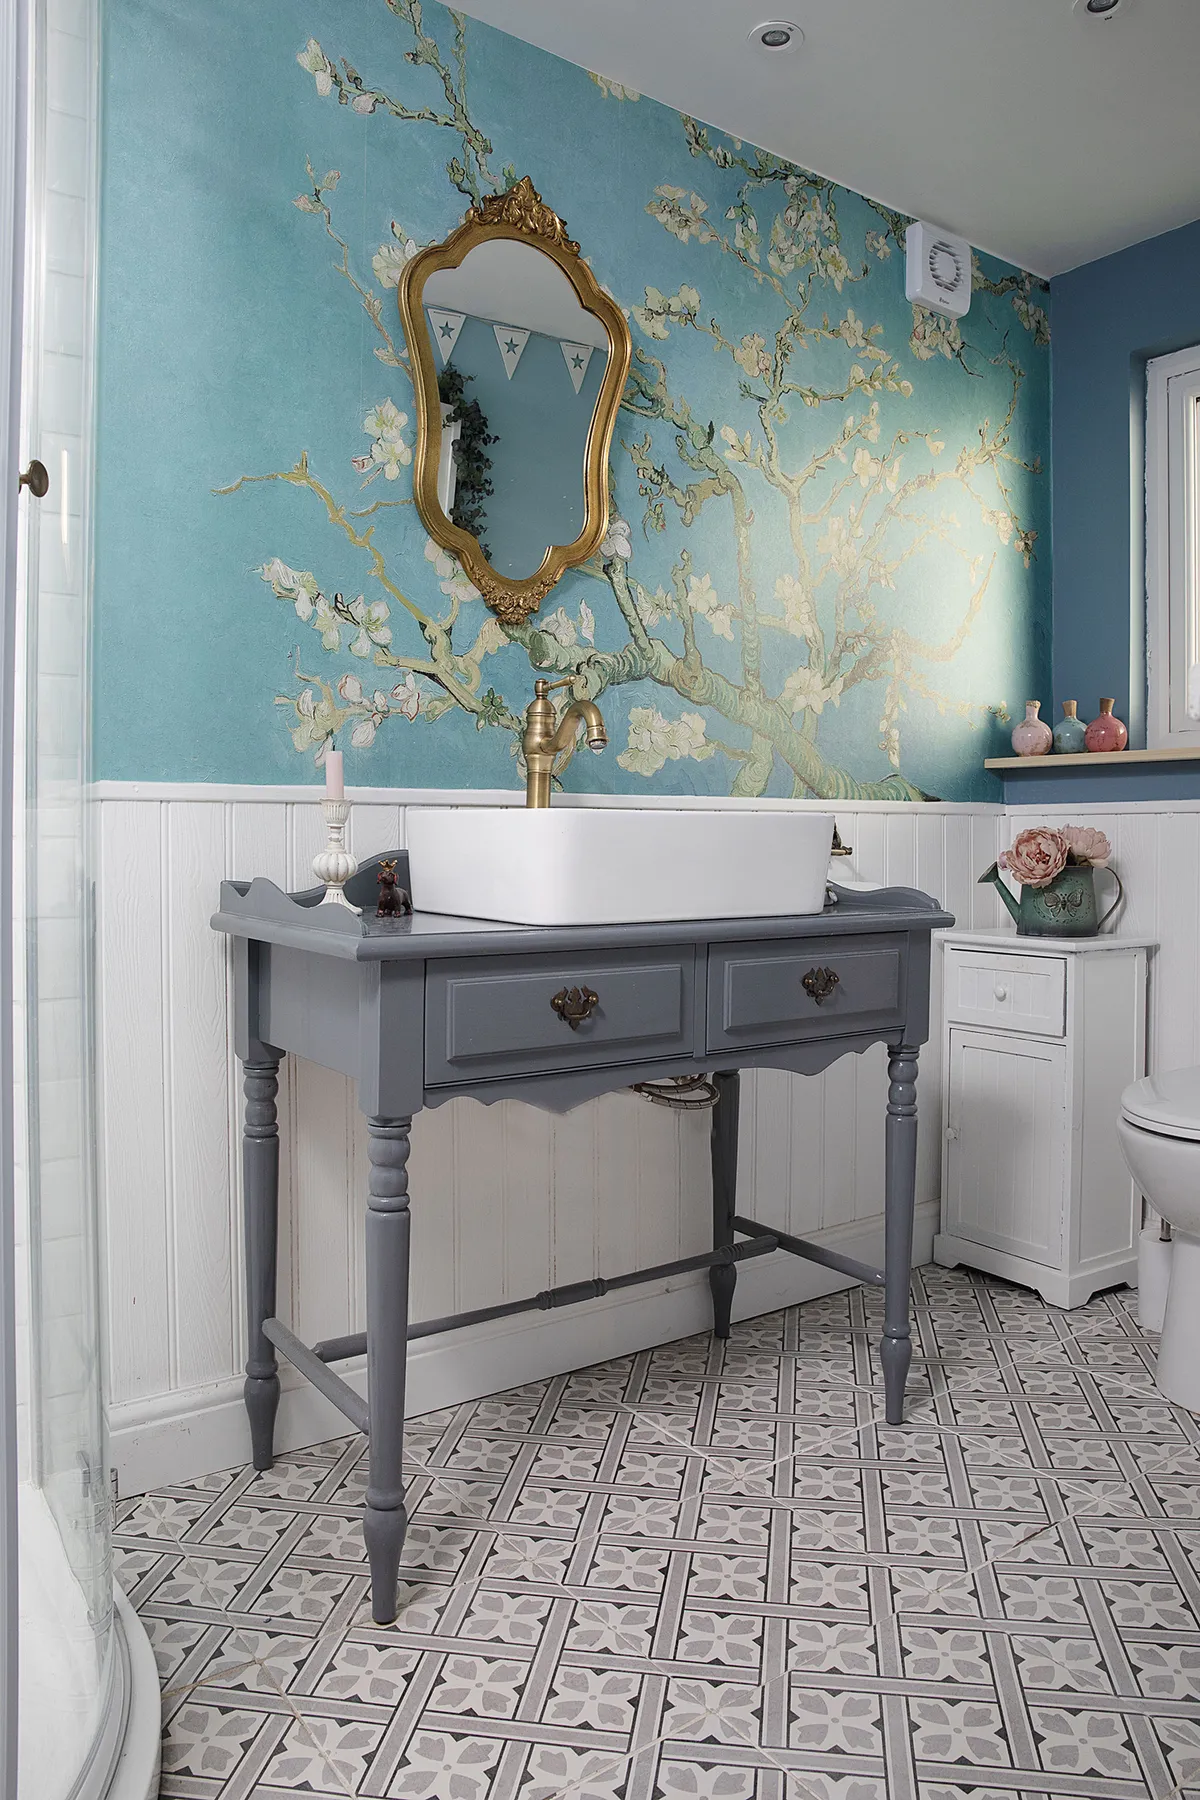 The mural makes a great statement in this small bathroom, adding bold colour and pattern to this small space